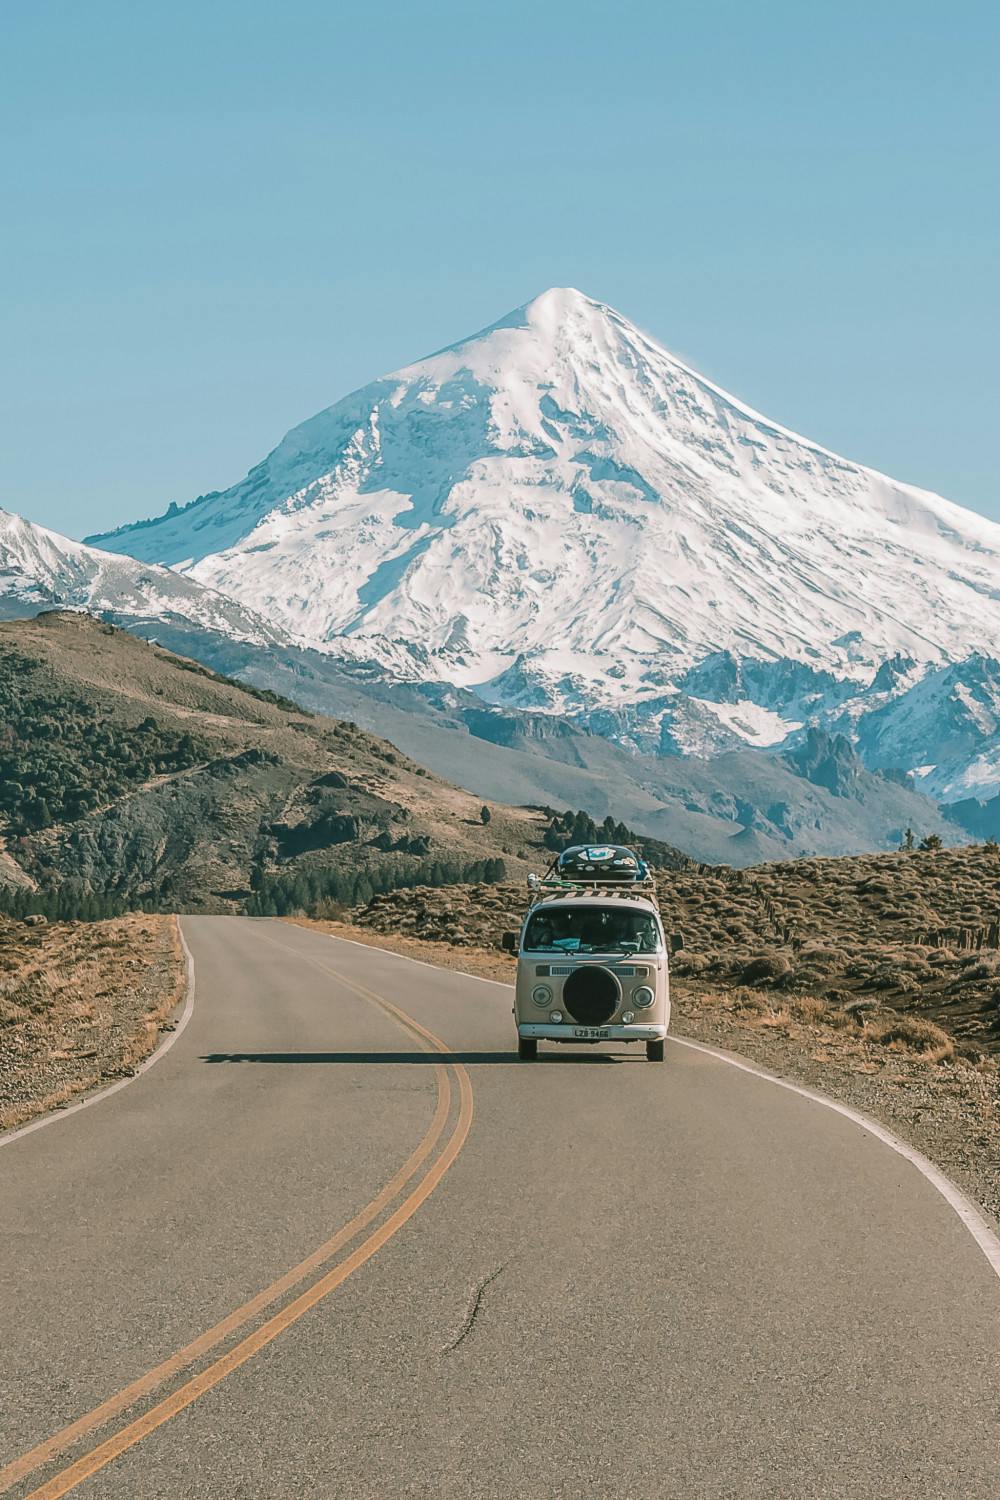 A classic Volkswagen van with luggage on the roof rack drives on a scenic highway away from a majestic, snow-capped mountain. The road curves gently in the foreground, framed by rugged terrain and clear blue skies, invoking a sense of adventure and travel in the great outdoors.